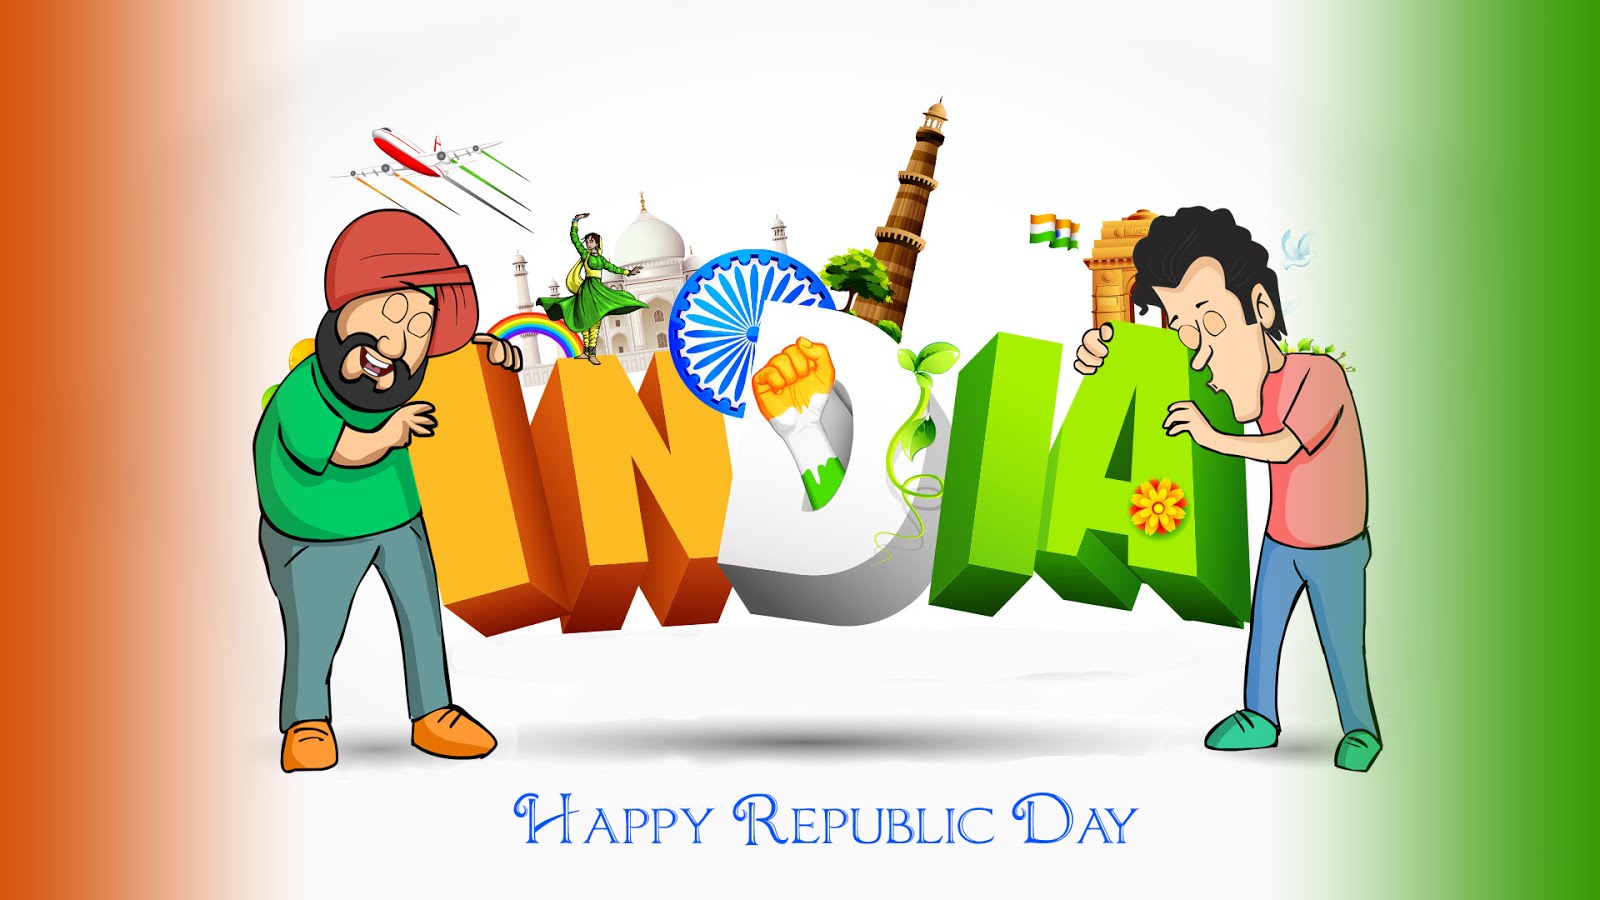 Republic Day 2022 SMS Messages Wishes Quotes. Happy Republic day 2022 wishes quotes wallpaper live information